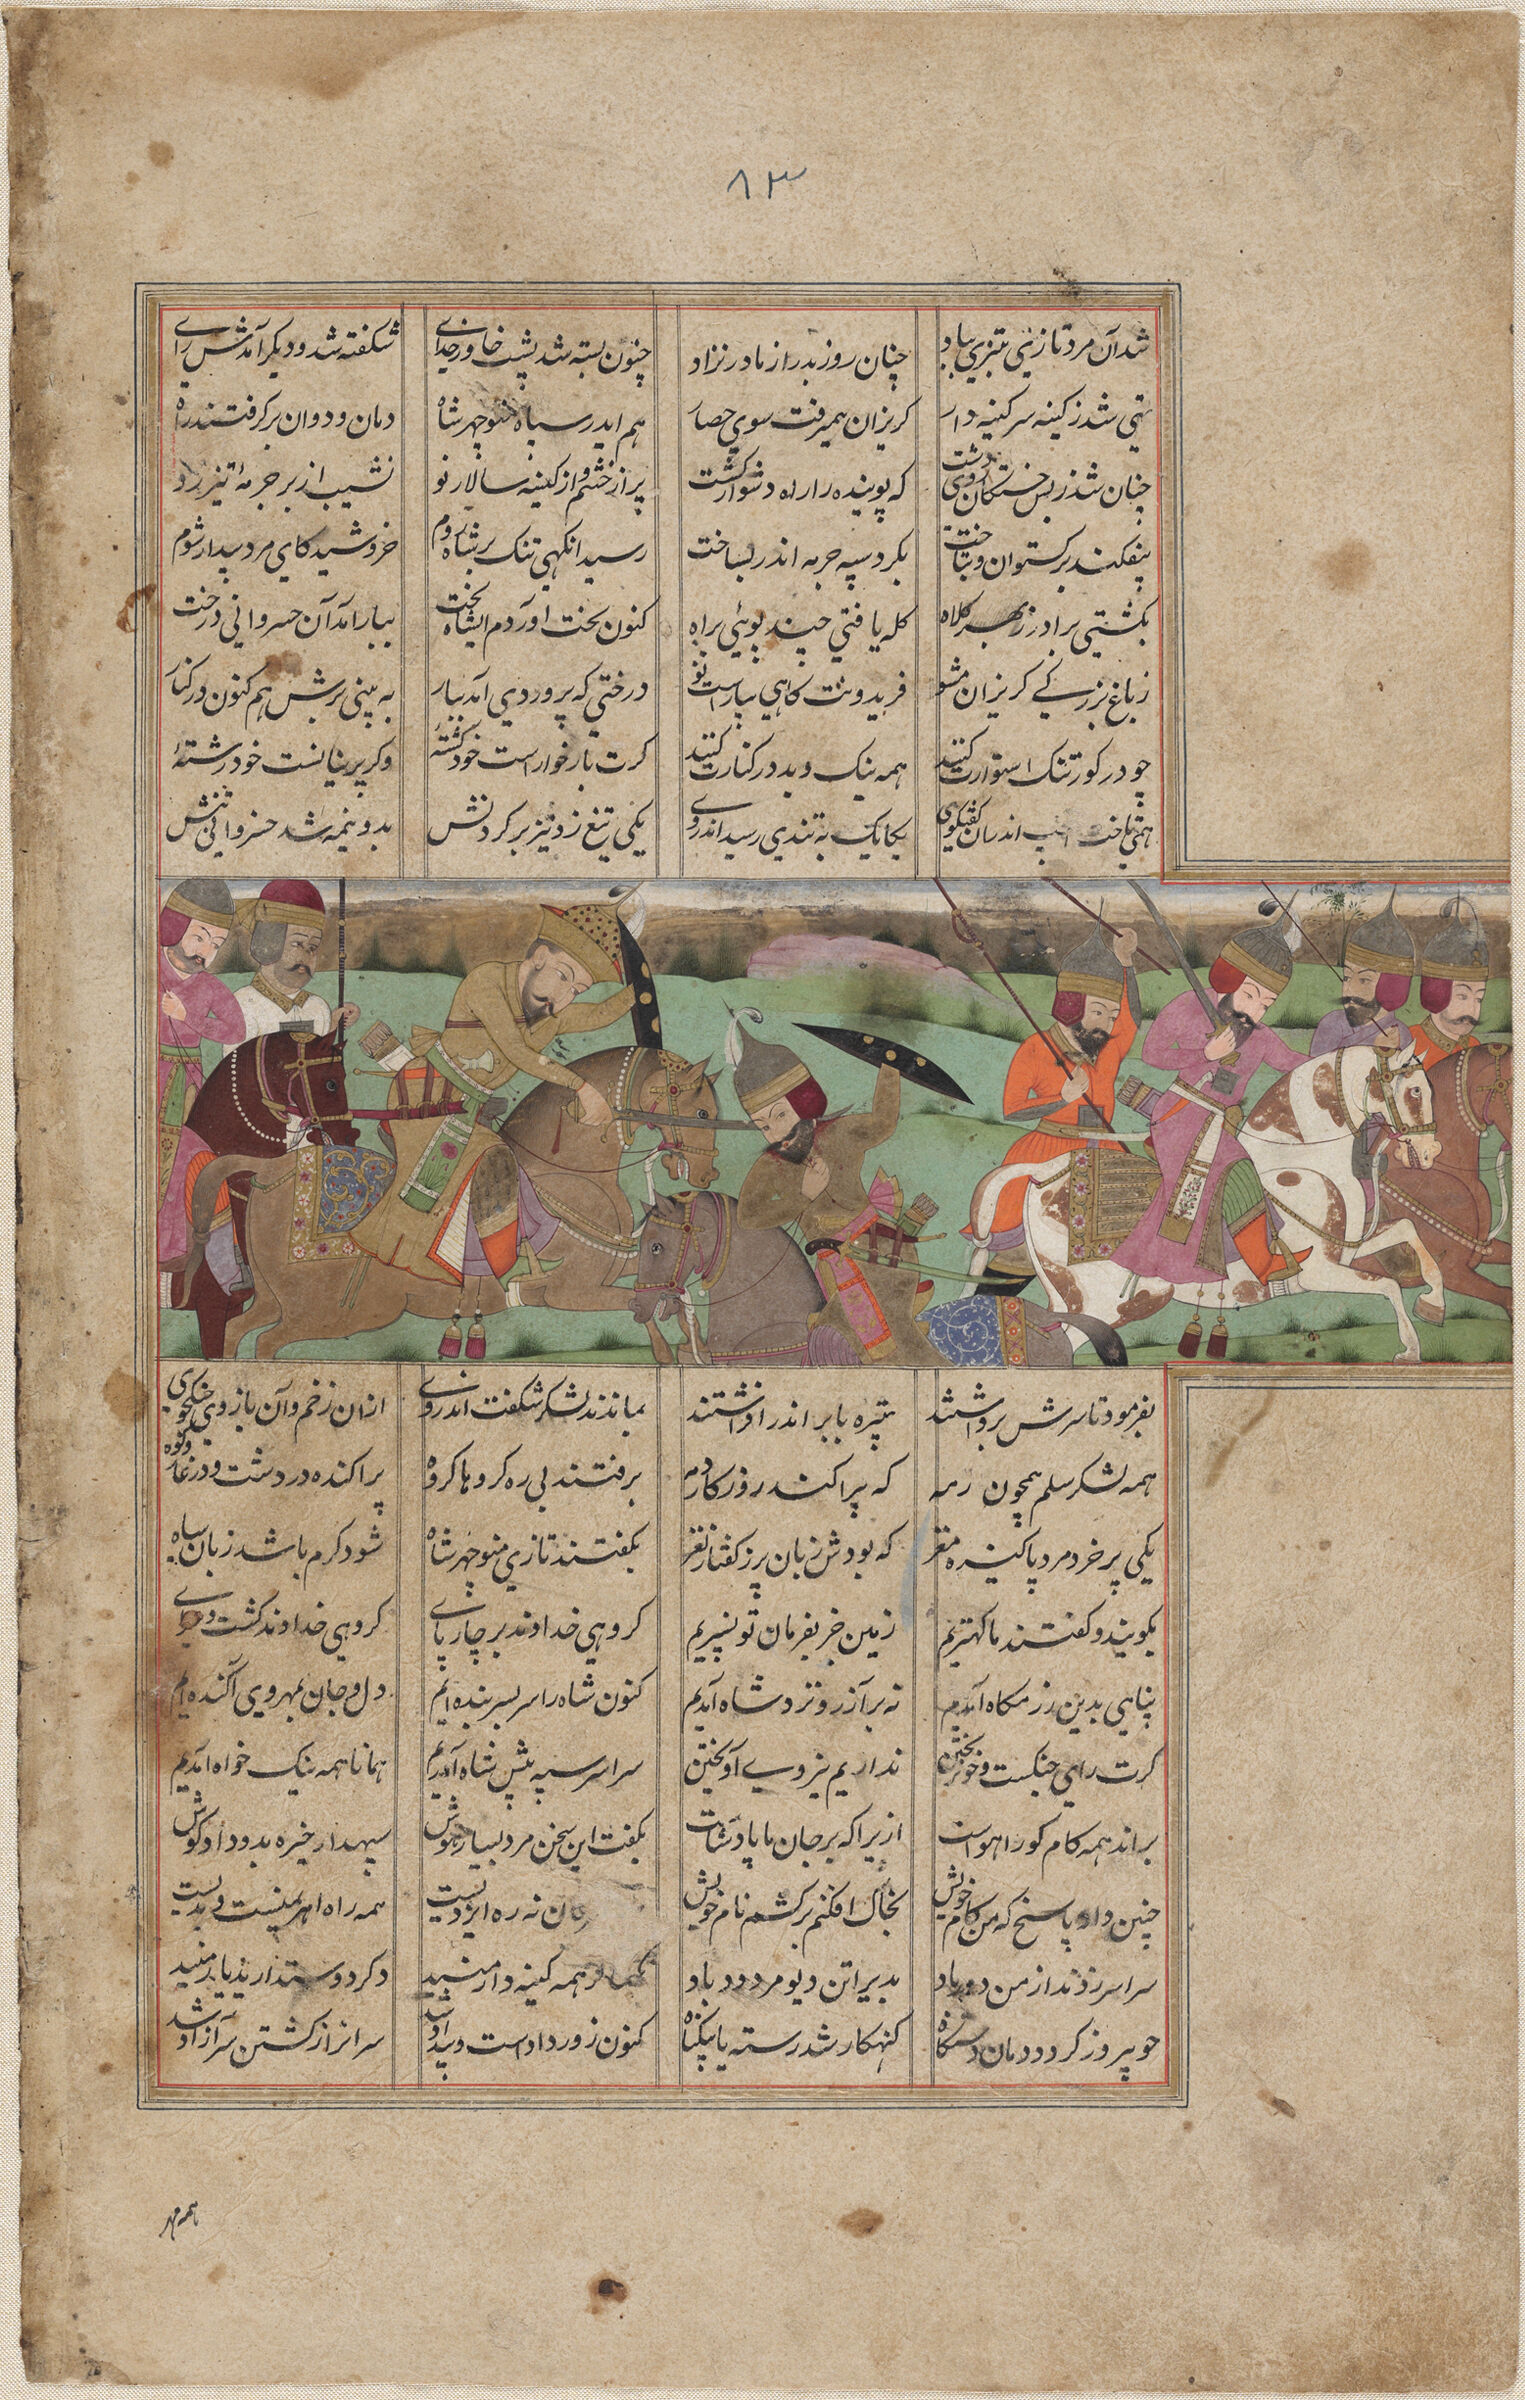 Manuchihr Slays Salm (Text Recto; Painting Verso Of Folio 43), Illustrated Folio From A Manuscript Of The Shahnama By Firdawsi